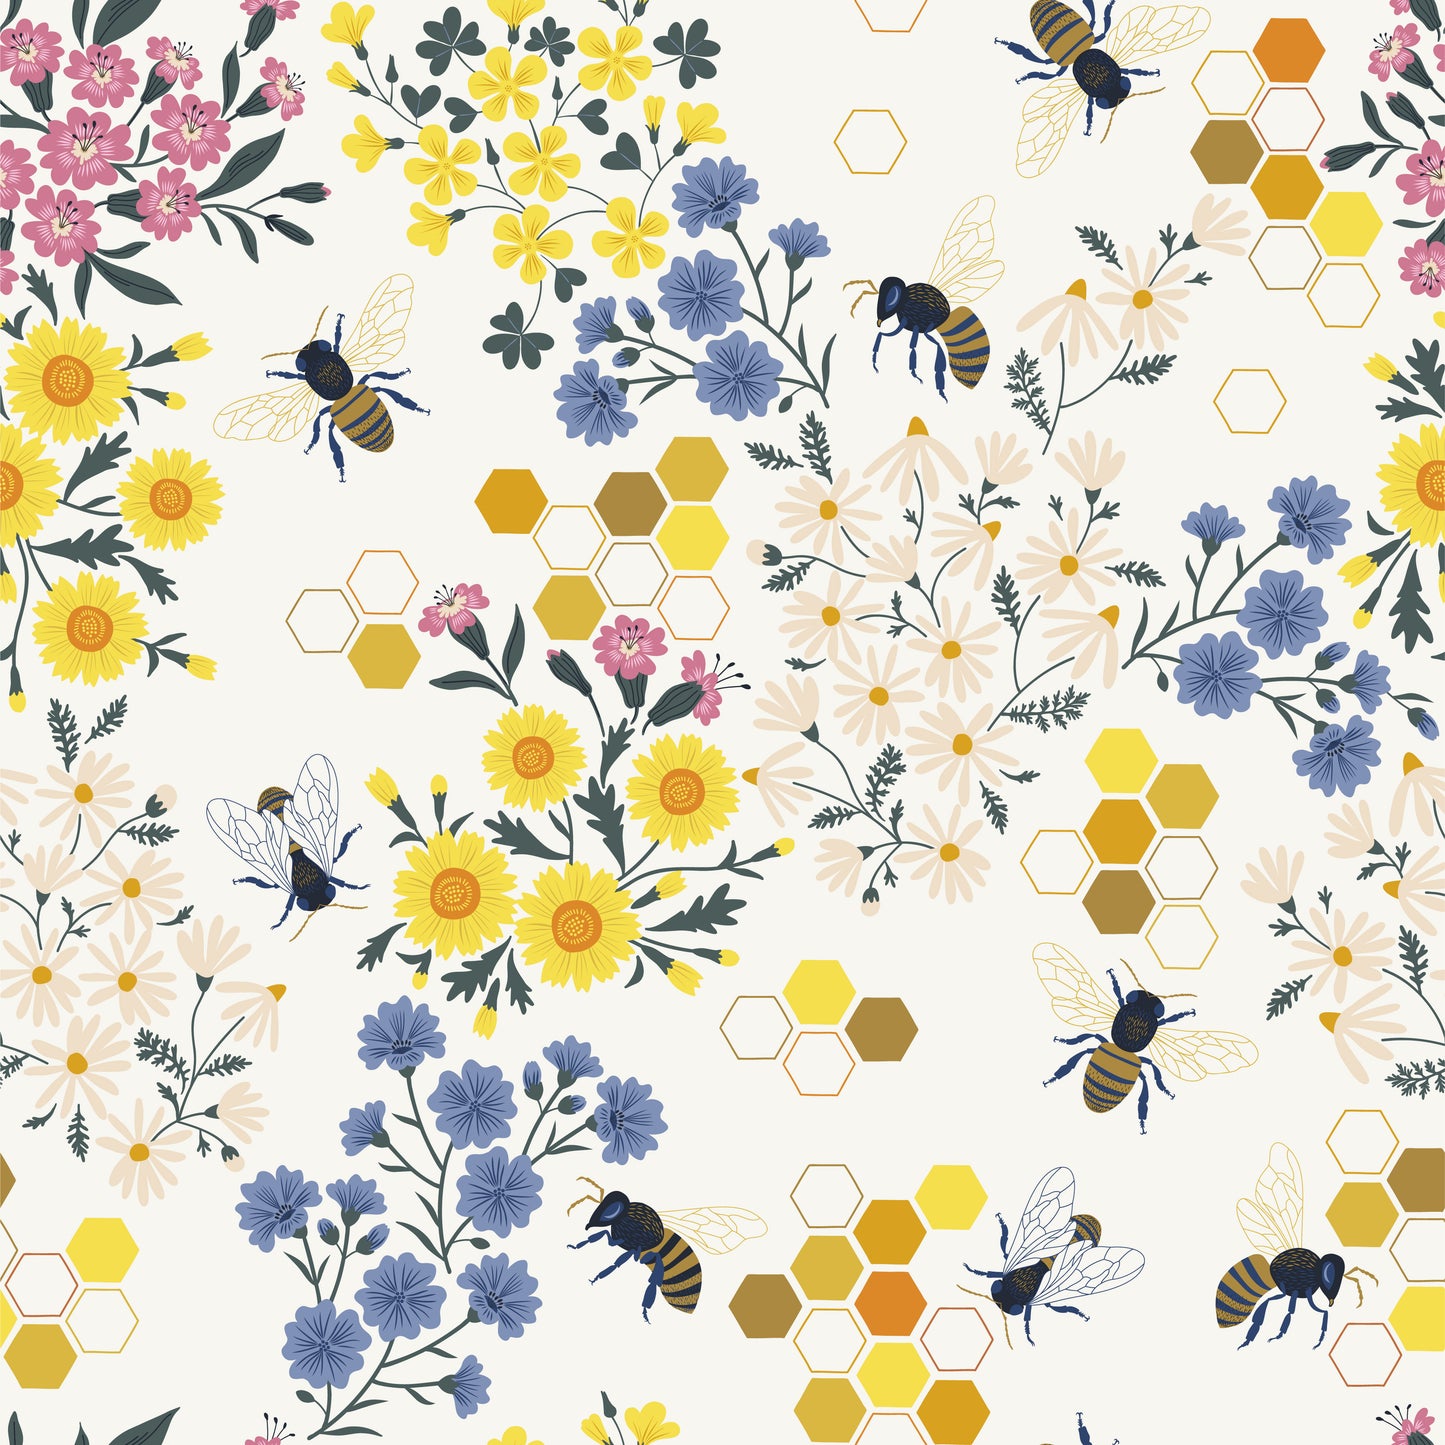 Honey Meadow floral honeycomb and honey bee pattern on white background easy to install and remove peel and stick custom wallpaper available in different lengths/sizes locally created and printed in Canada Artichoke wallpaper. Washable, durable, commercial grade, removable and waterproof.